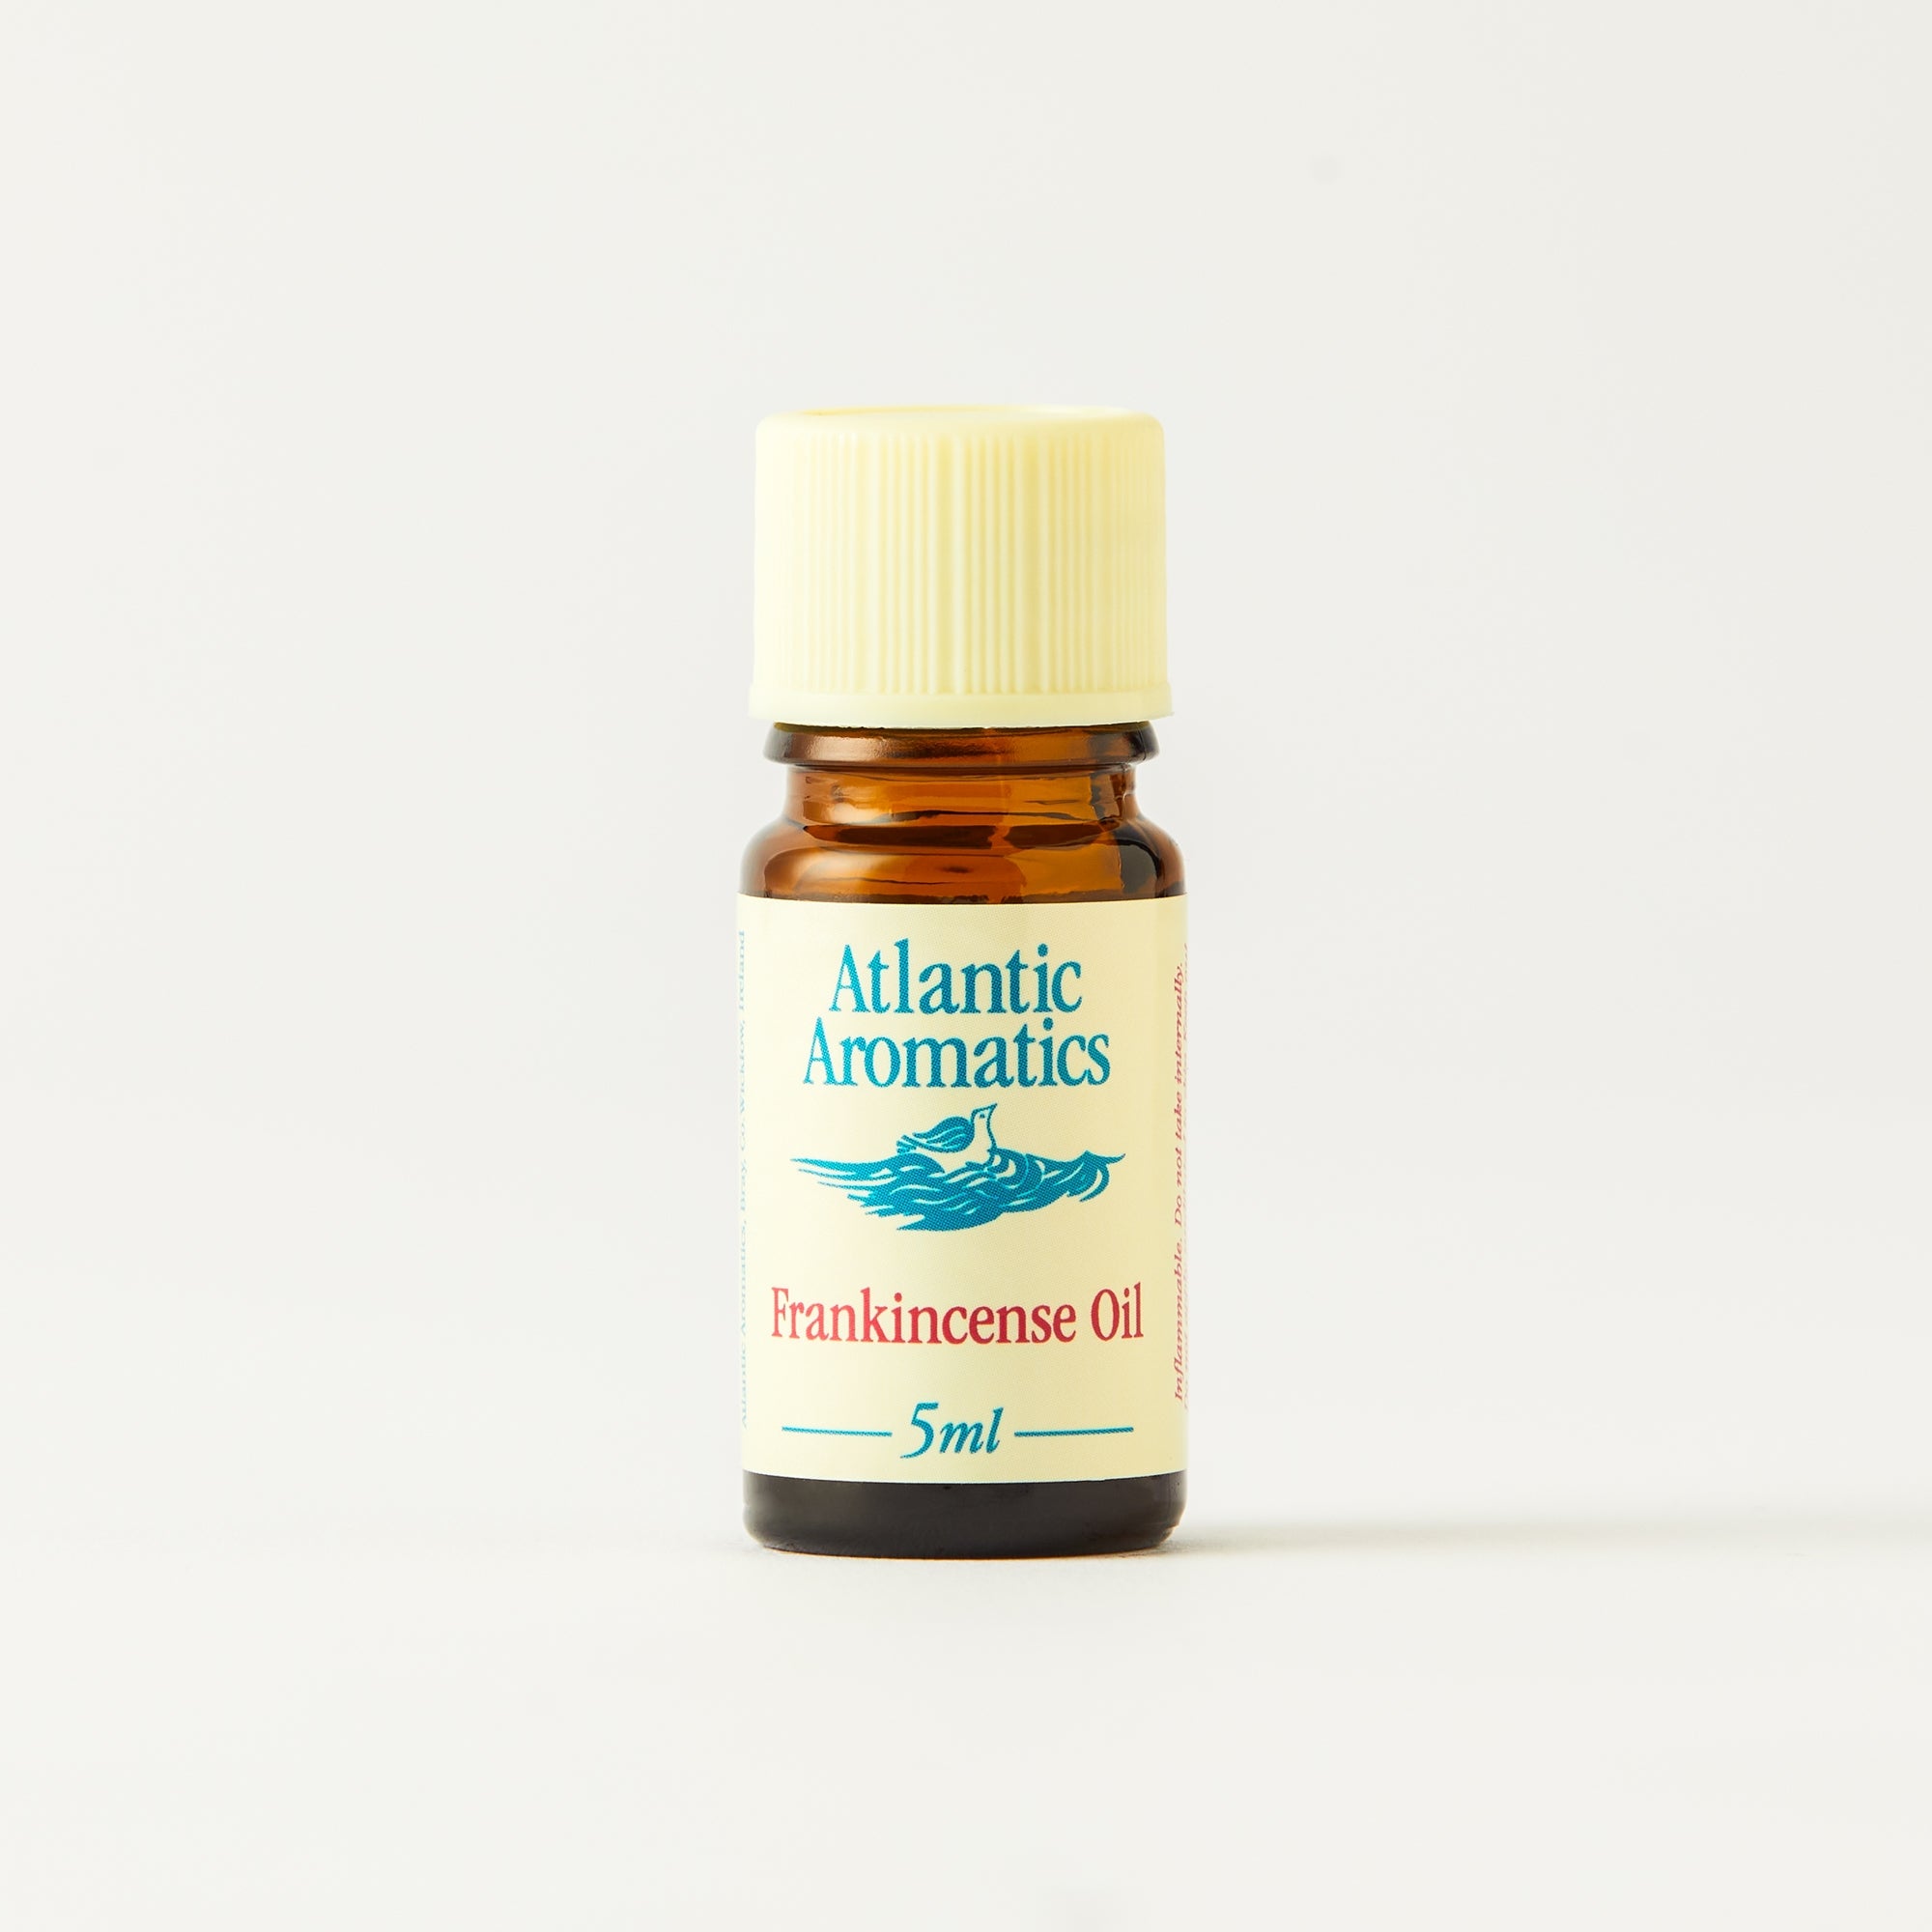 5 Frankincense Oil Benefits Scientists Want You to Know – The Amino Company